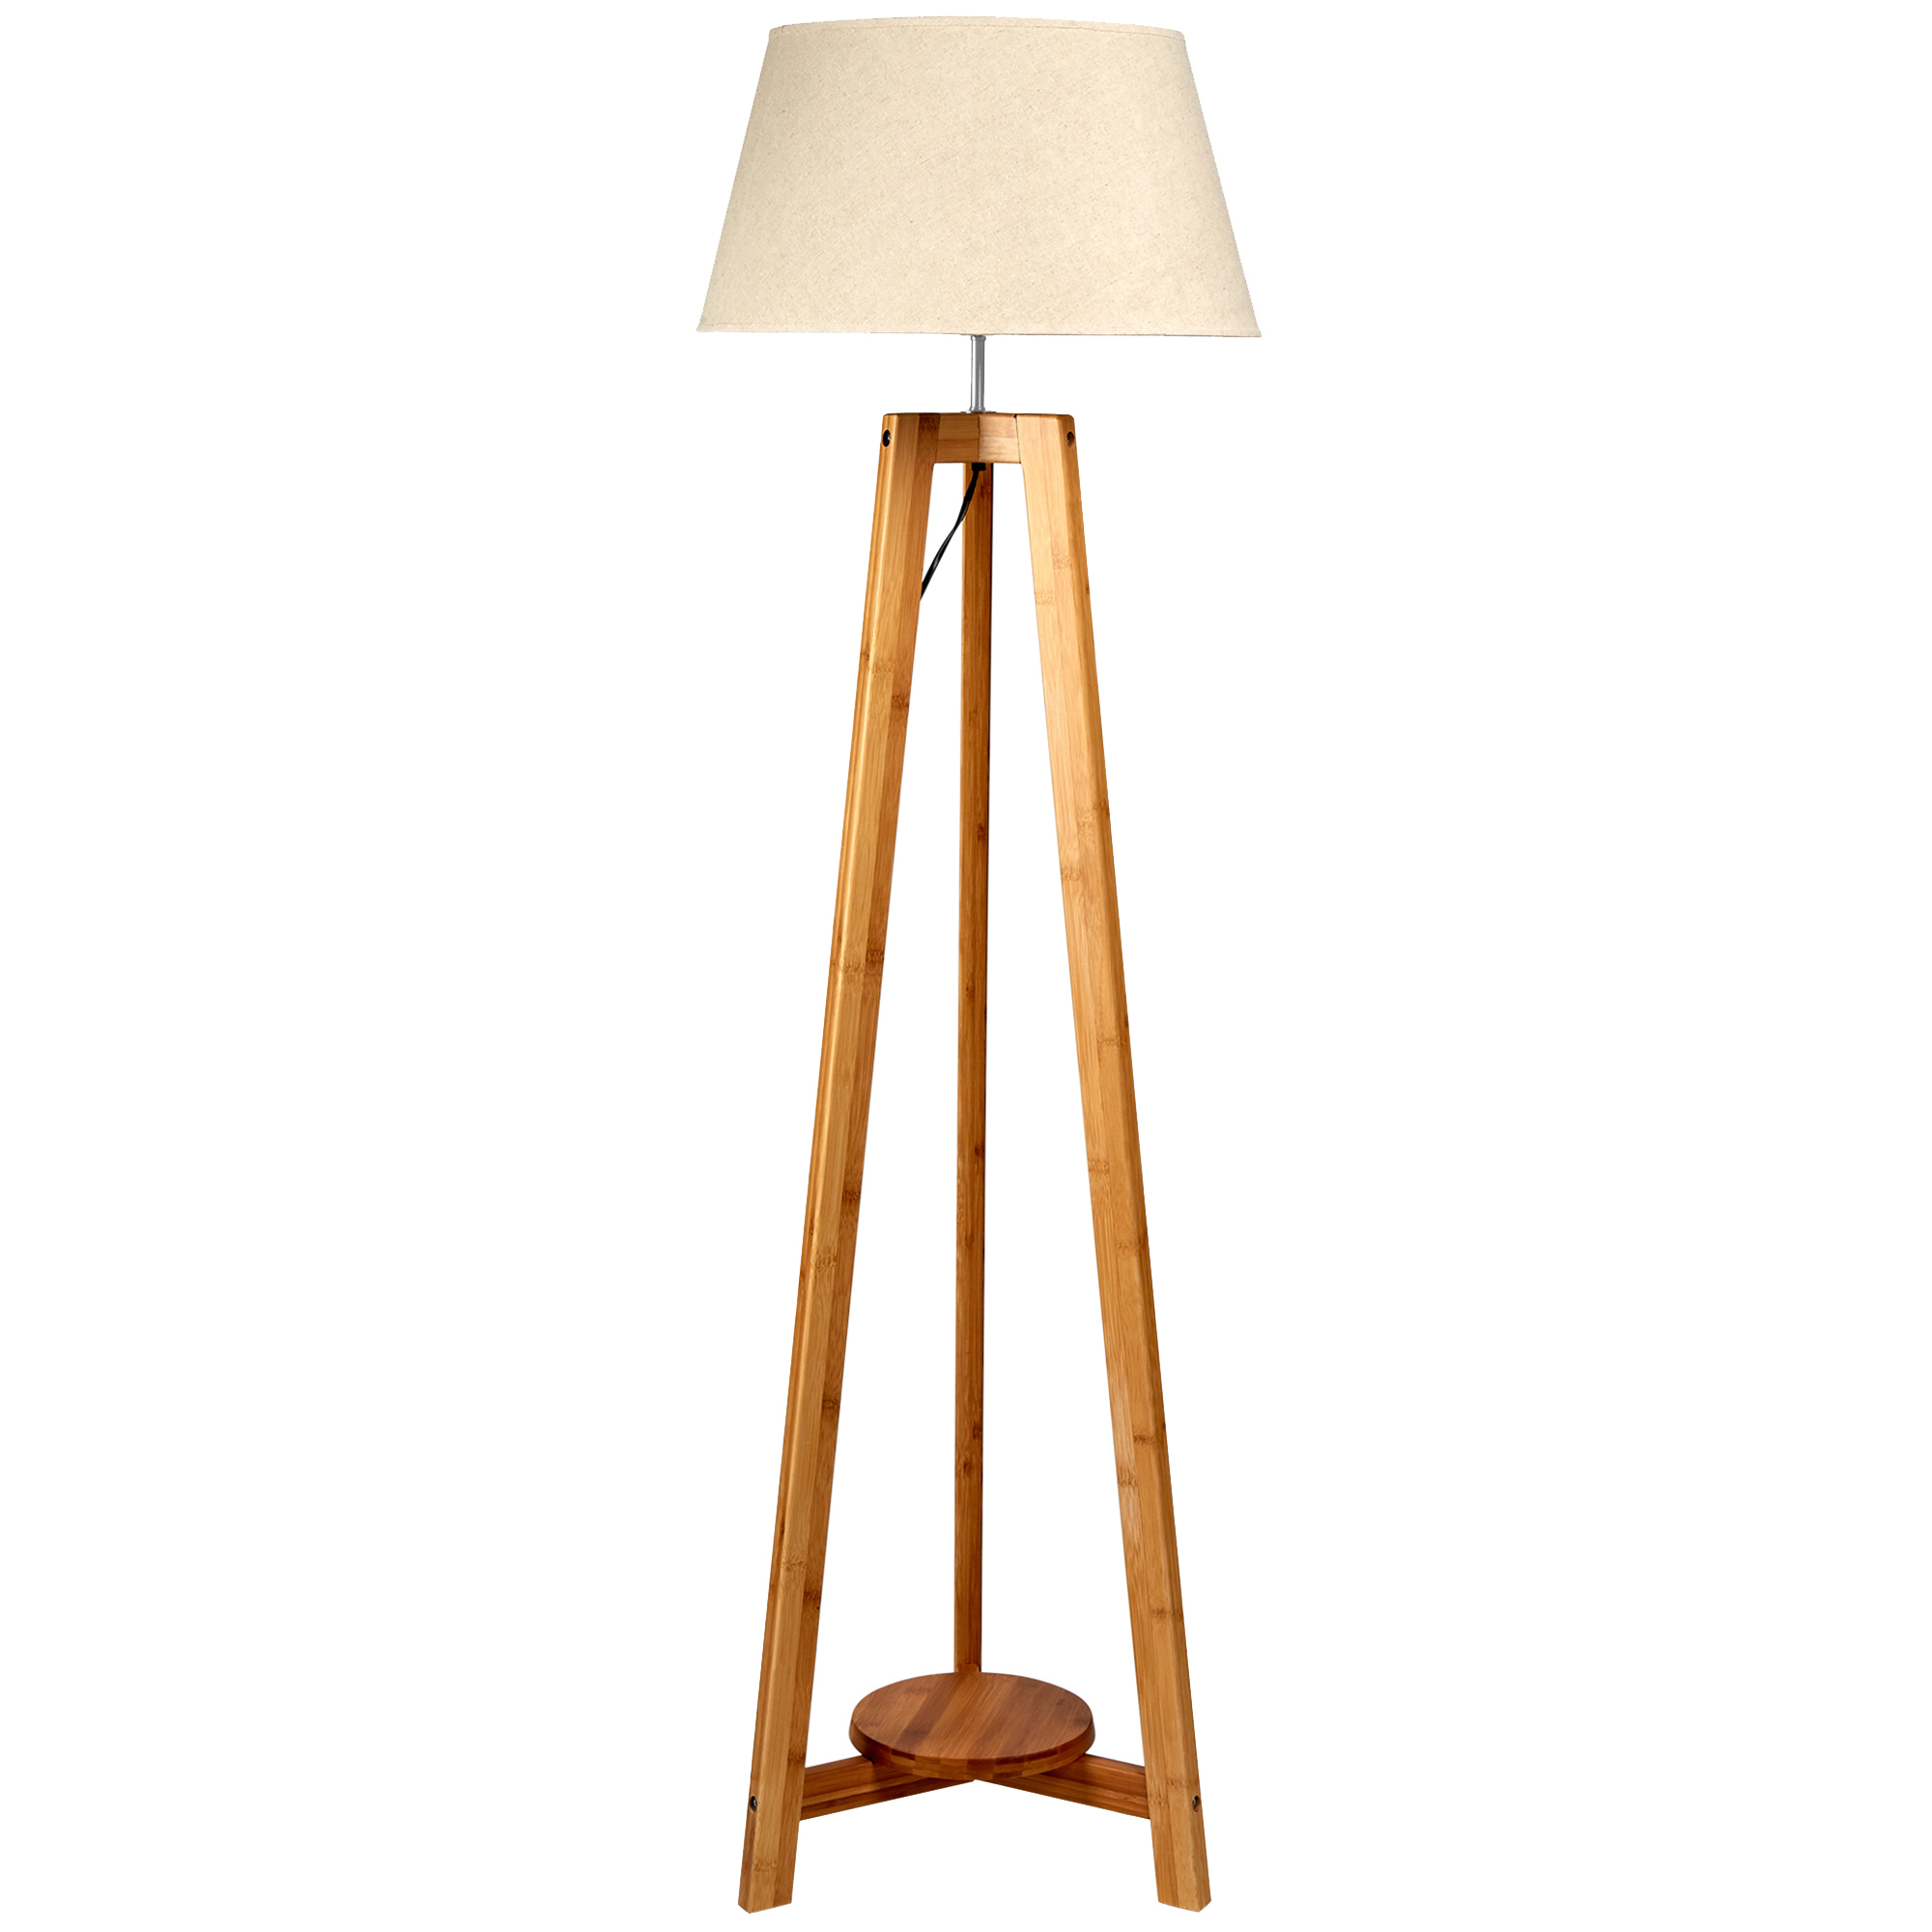 New Life Lighting Diogo Tripod Floor Lamp Reviews Temple Webster